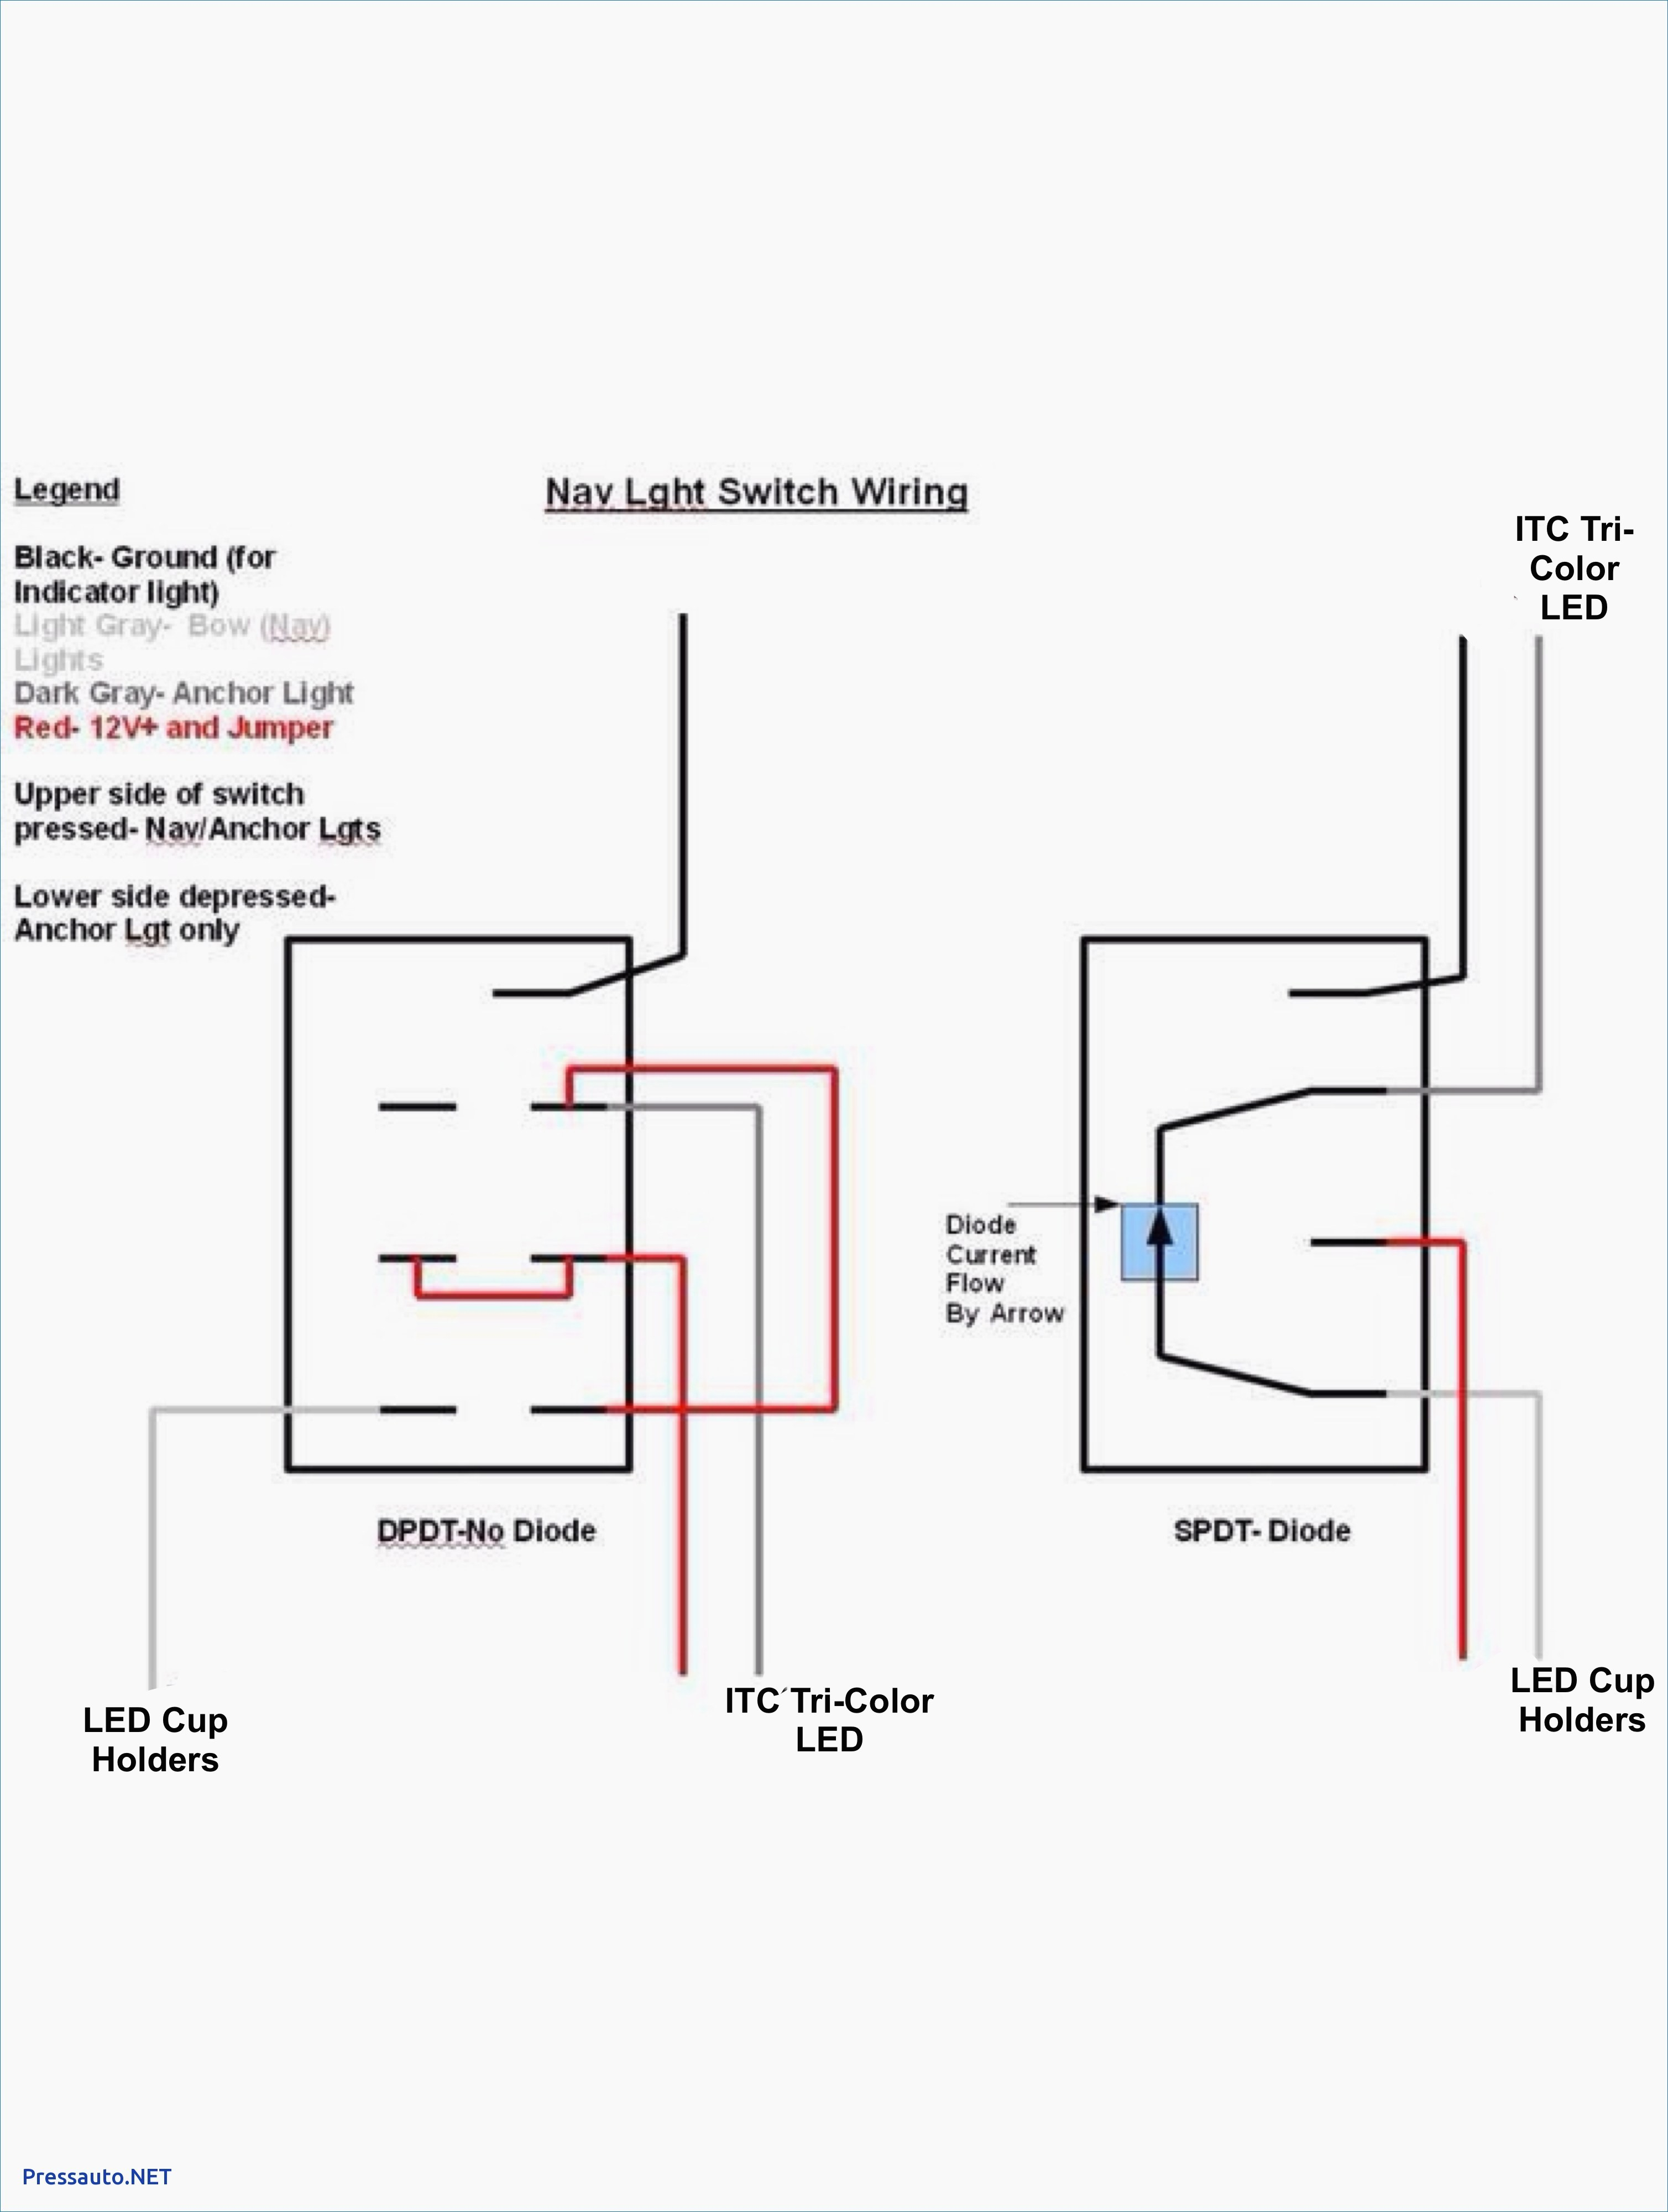 lighted rocker switch wiring diagram | Decoratingspecial.com